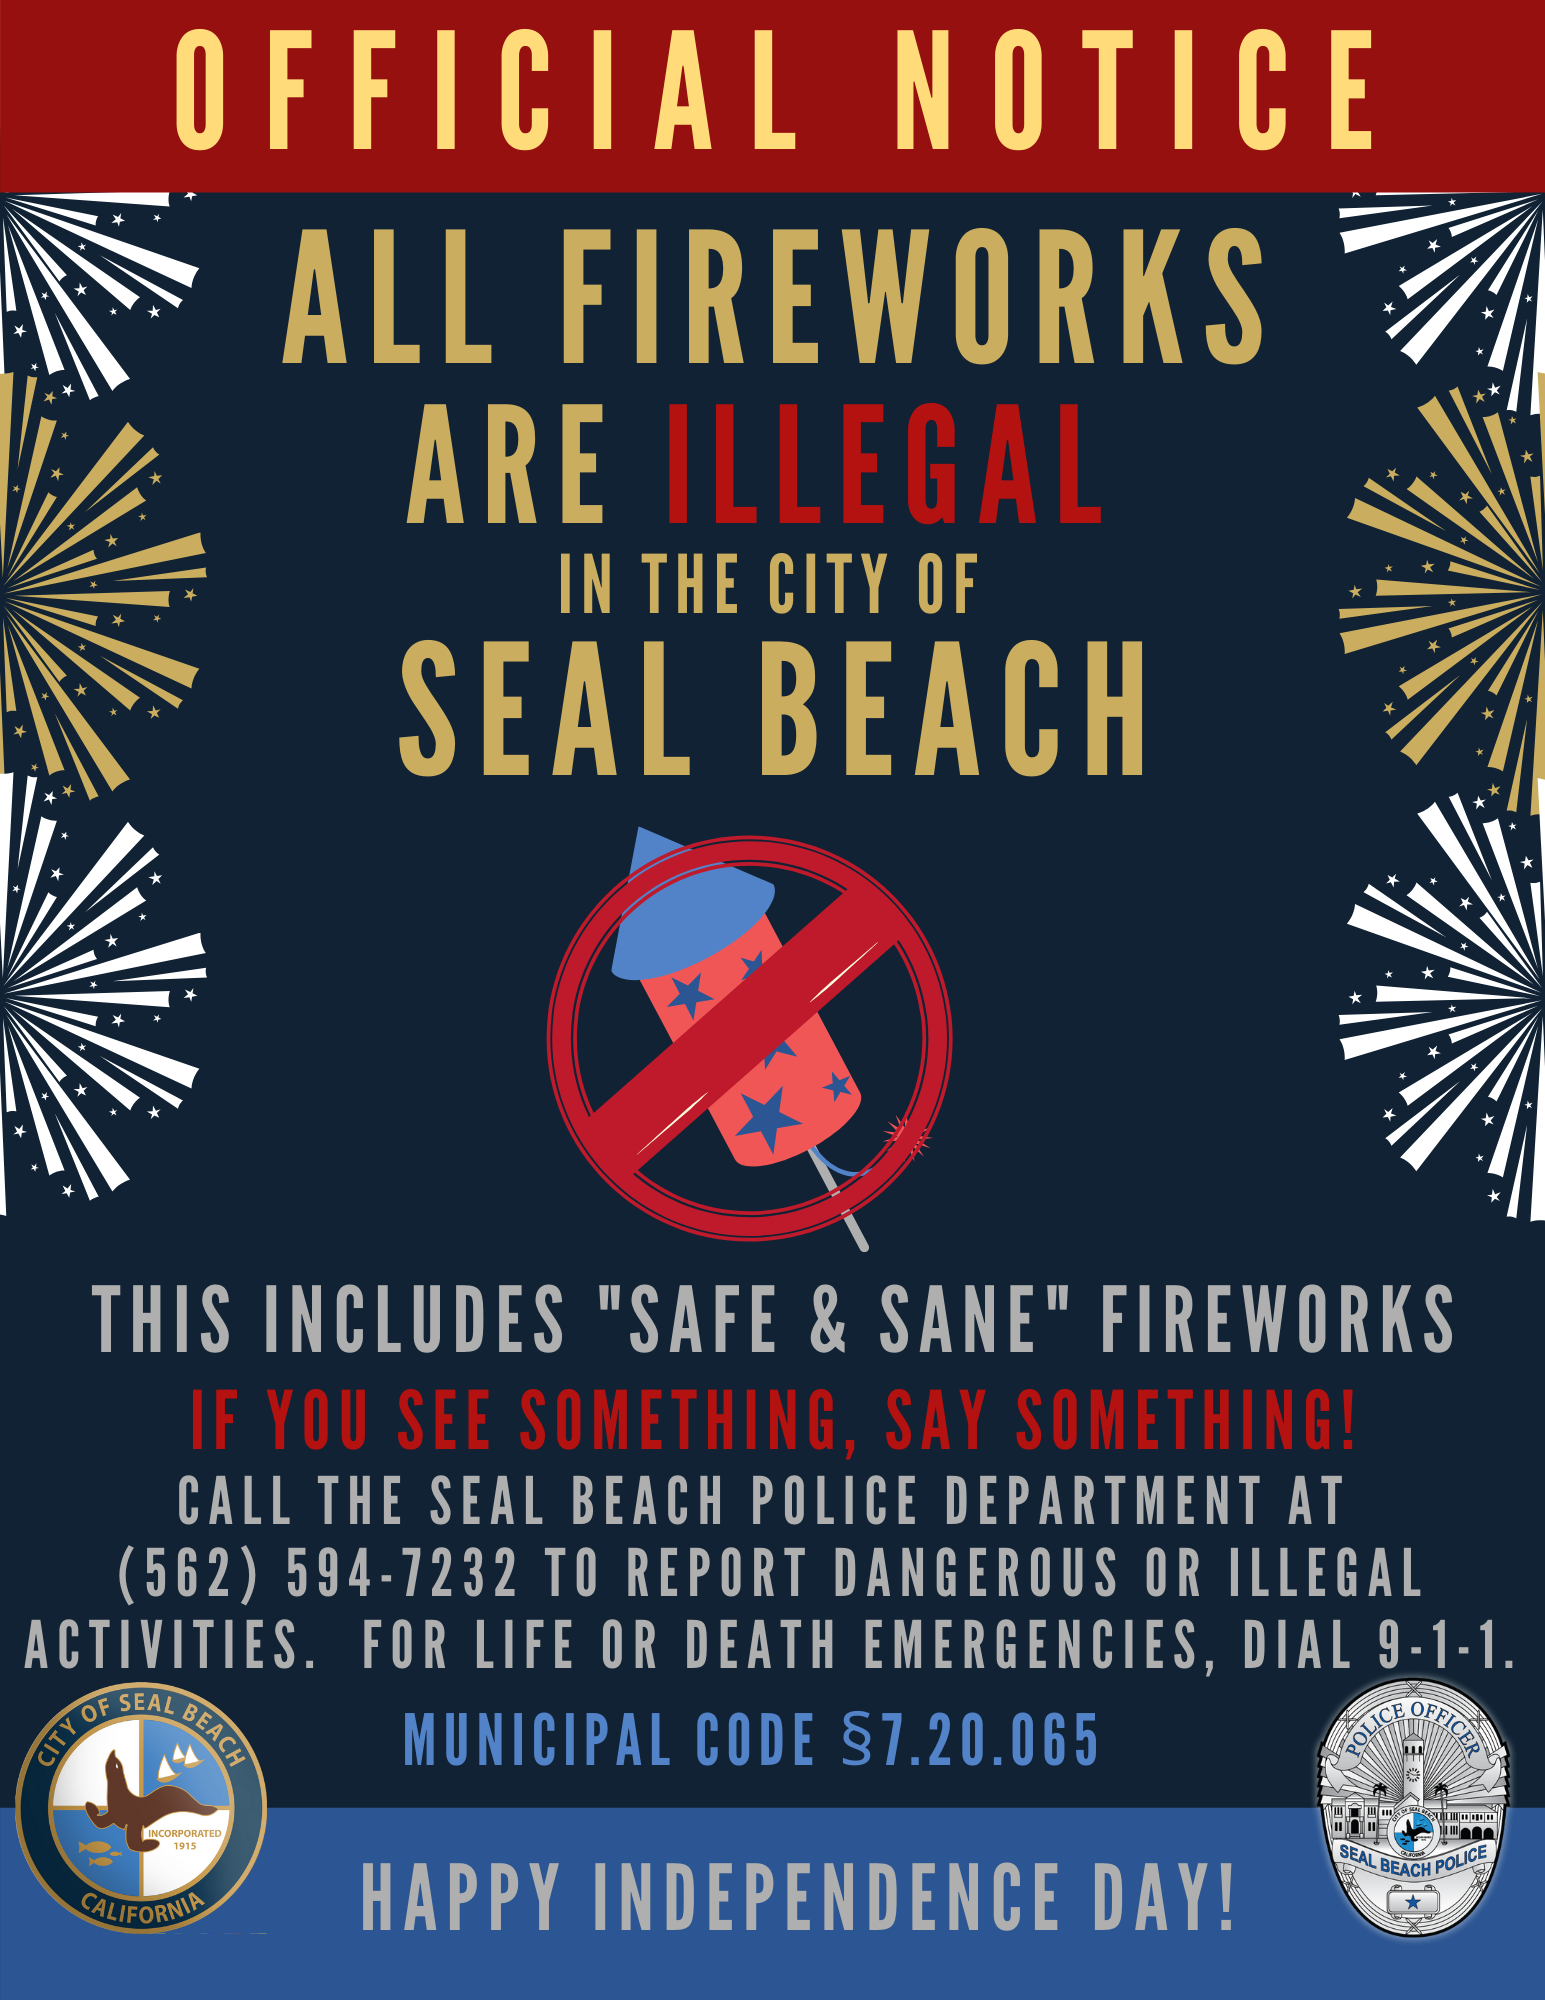 Official Notice: All fireworks are illegal in the City of Seal Beach. This includes Safe & Sane fireworks. If you see something, say something!